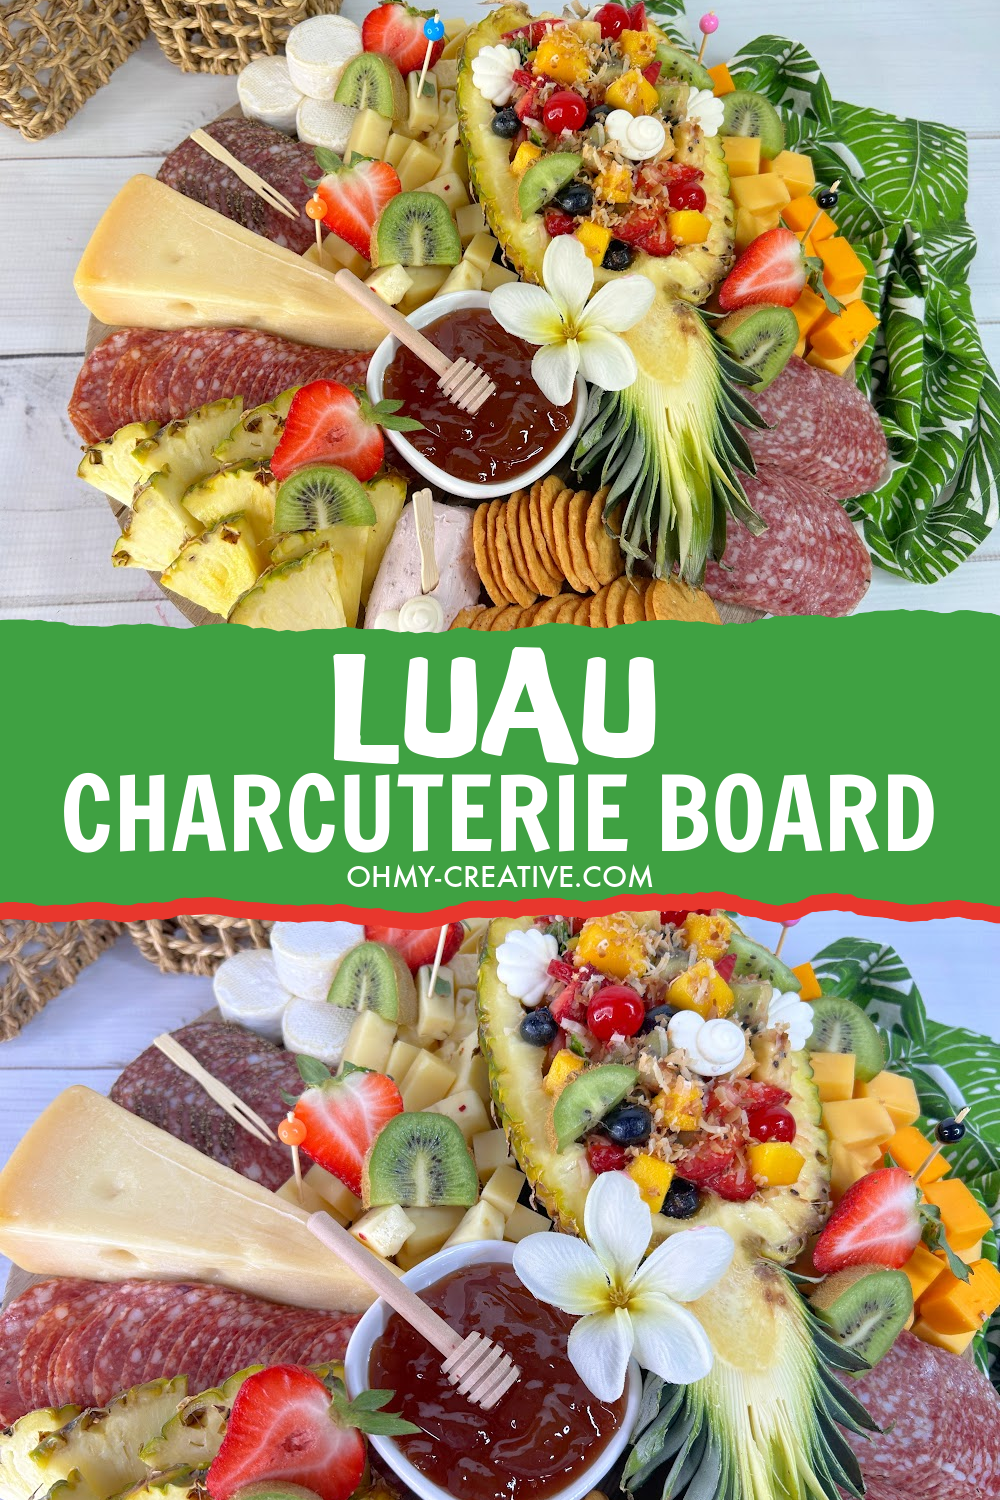 Double image pinterest image of a luau charcuterie board with pineapple, meats and cheeses.